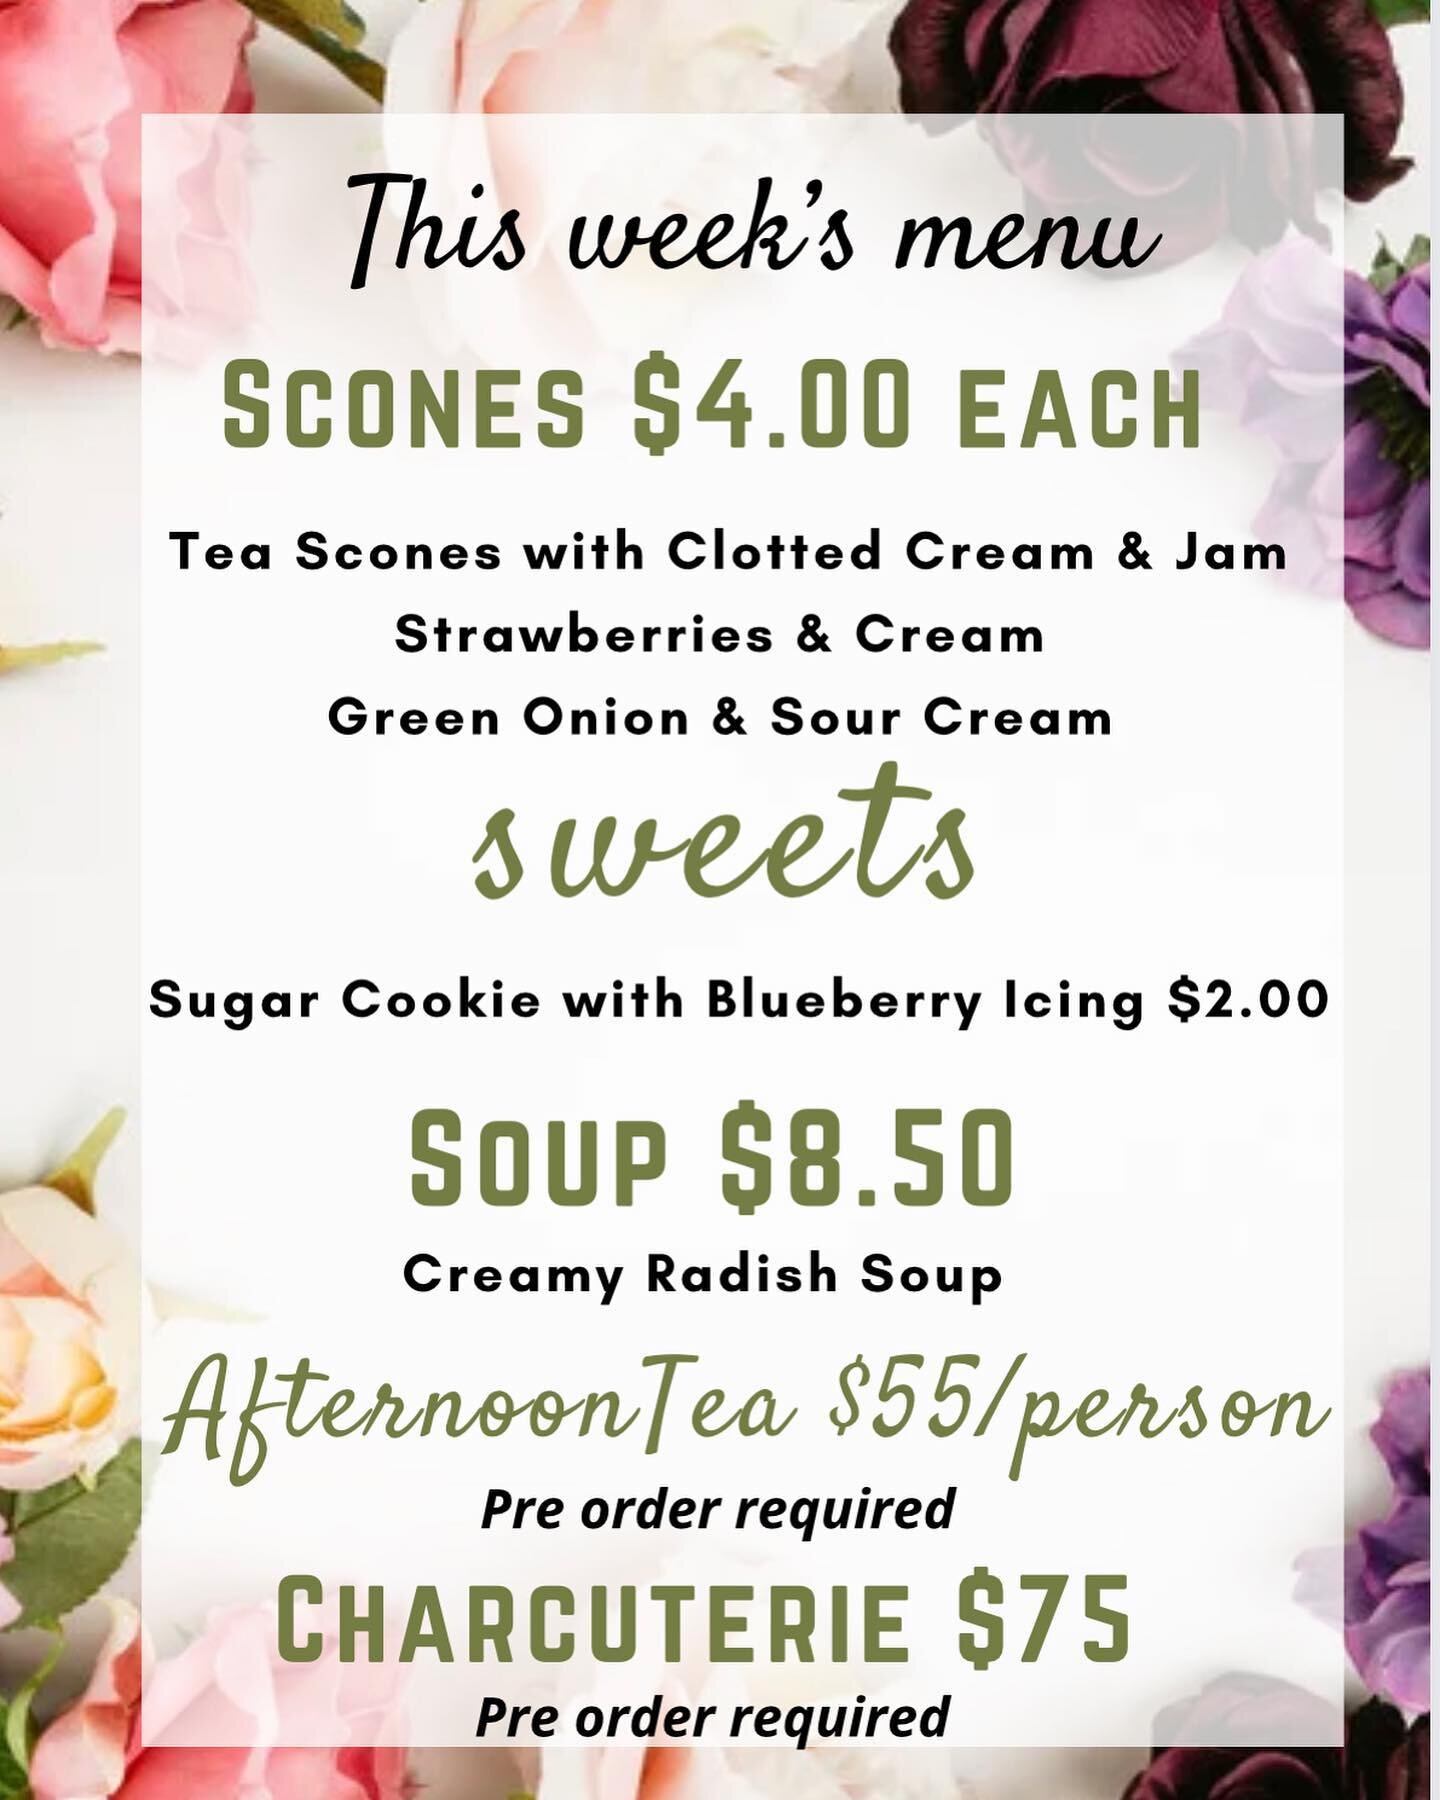 Dine in &amp; takeout menu for this week at the teahouse! We are open Thursday - Sunday, 10am - 3pm. Please call/ text 403-978-7391 for orders and reservations. 🫖🤍
&bull;
&bull;
&bull;
#thenobleteahouse #afternoontea #charcuterie #freshly #baked #s